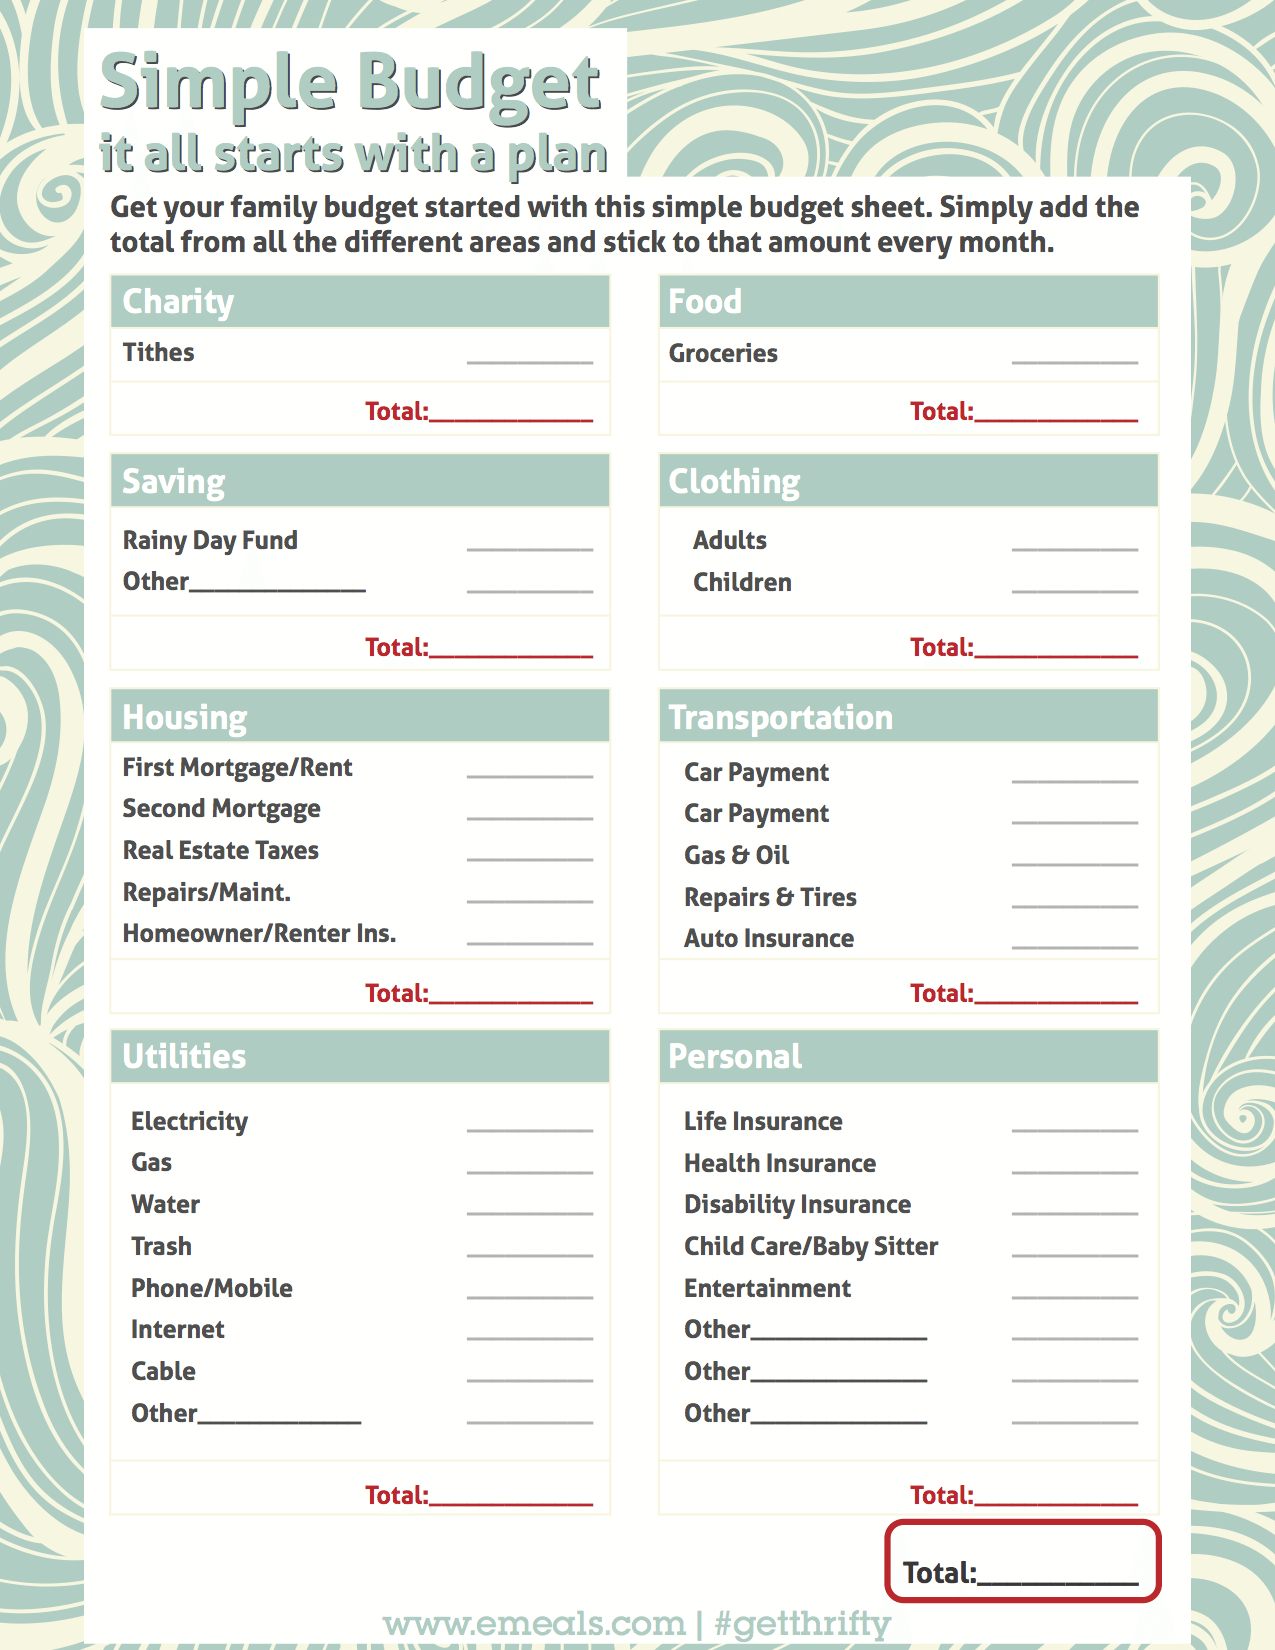 Simple Budget Worksheet Free Printable | For The Home | Budgeting - Free Printable Family Budget